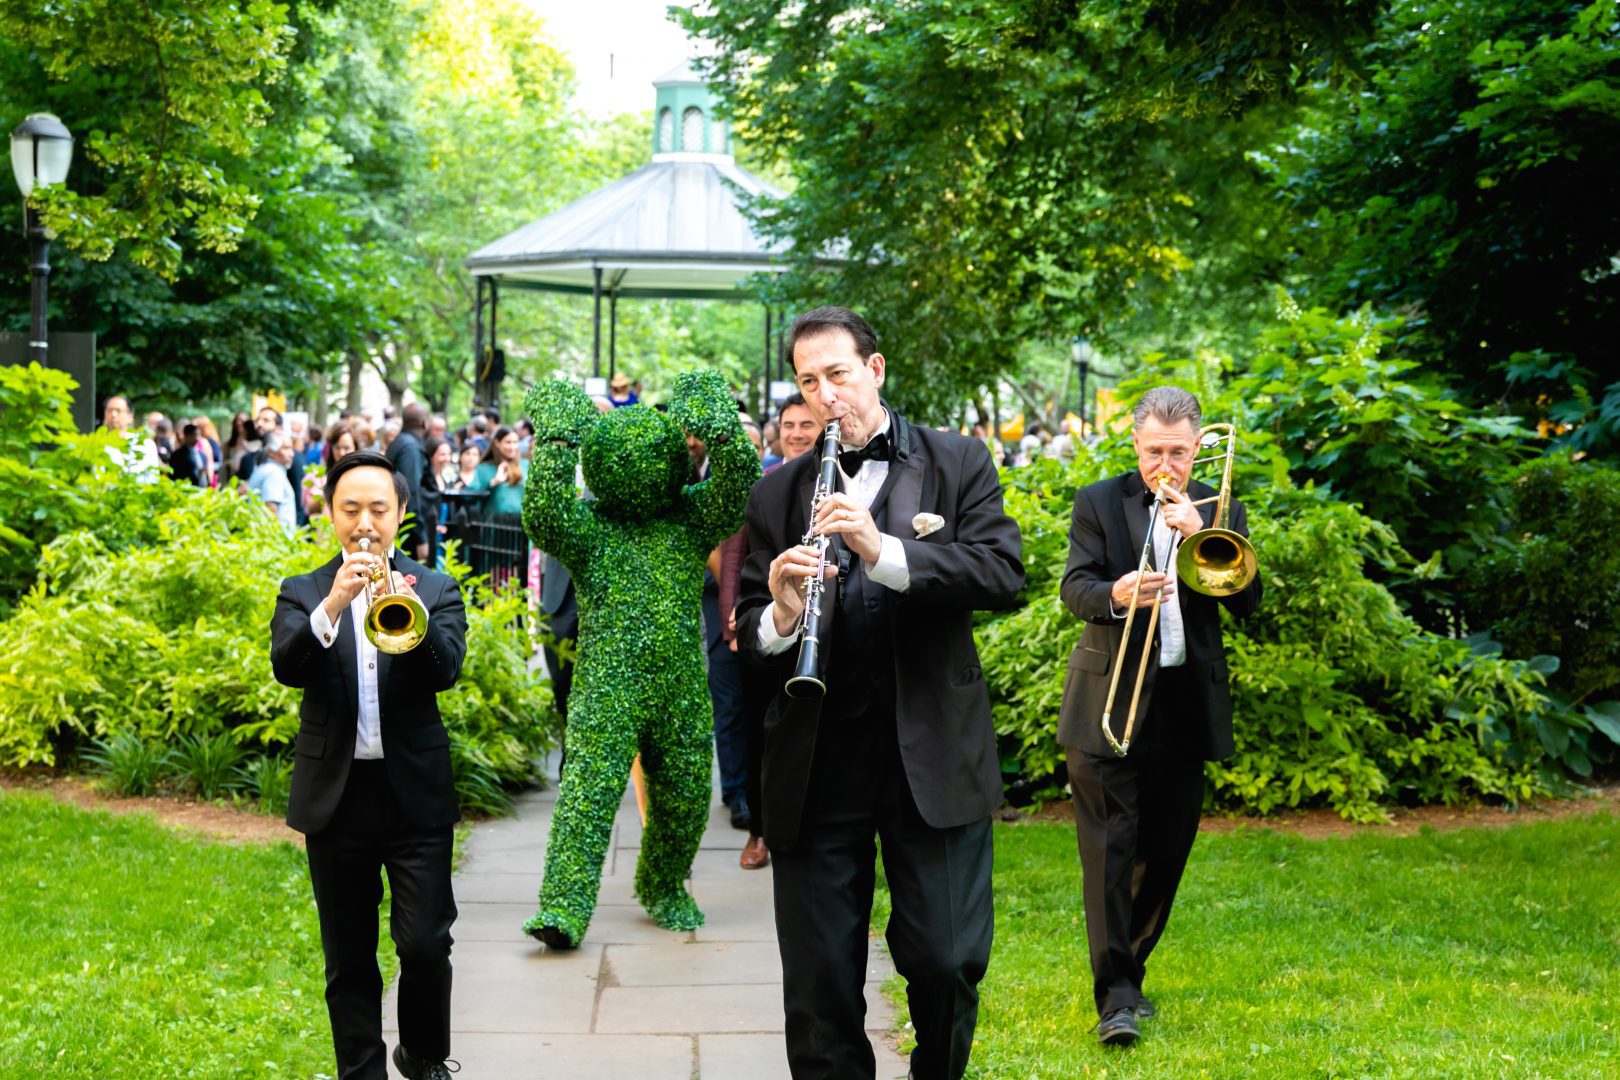 A brass band plays music as gala guests enter the International House for the event